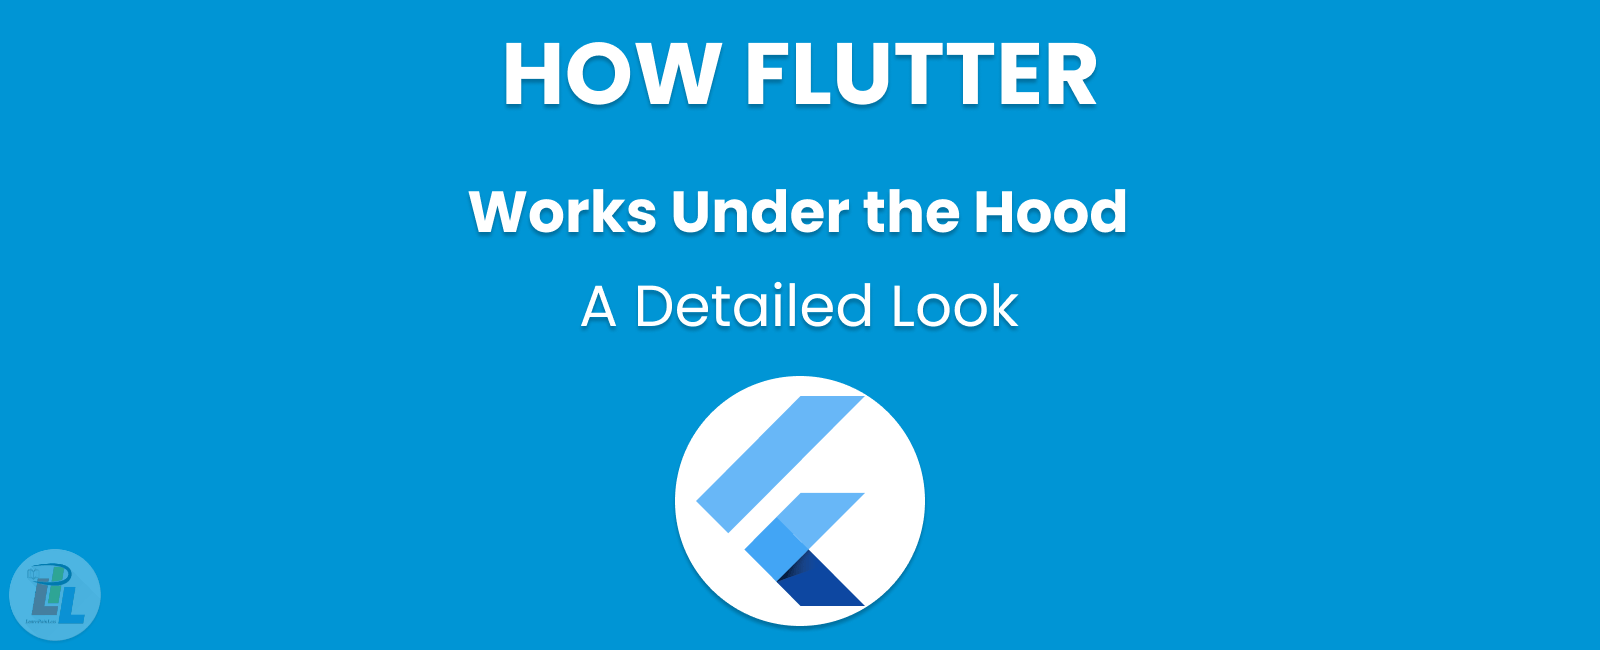 A Detailed Look At How Flutter Works Under the Hood